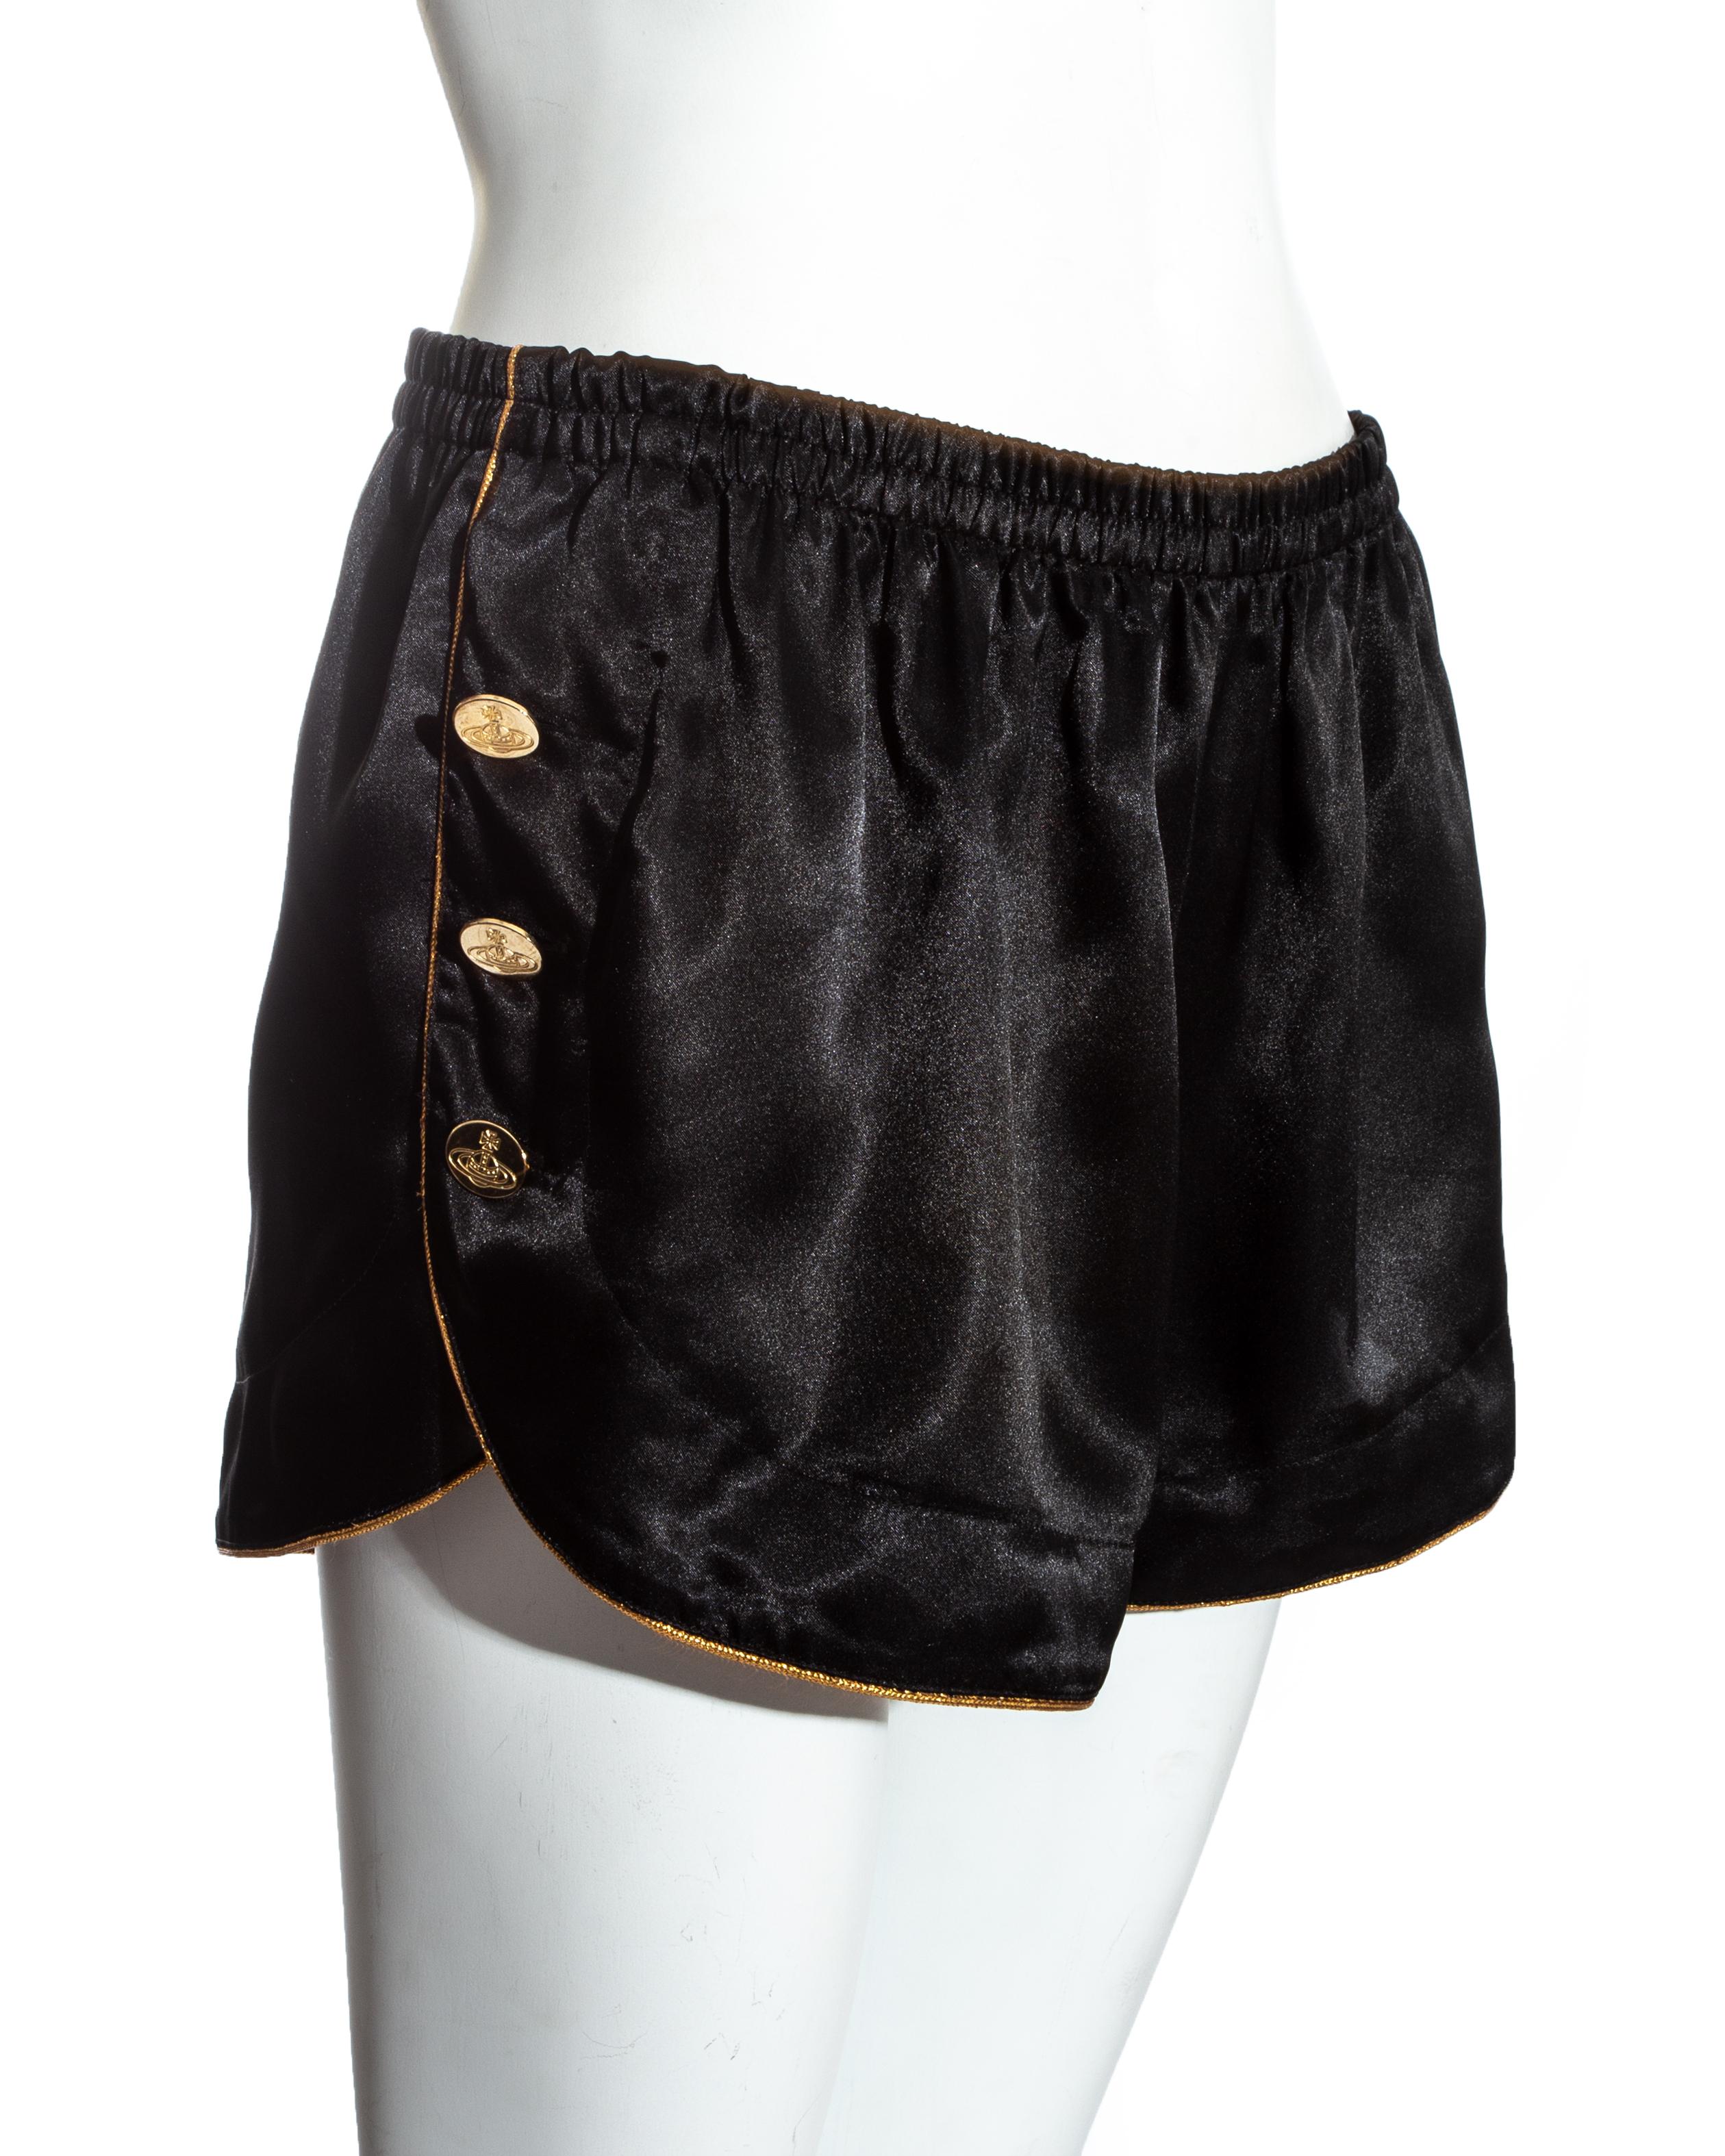 Women's Vivienne Westwood black and gold embroidered satin mini shorts, ss 1993